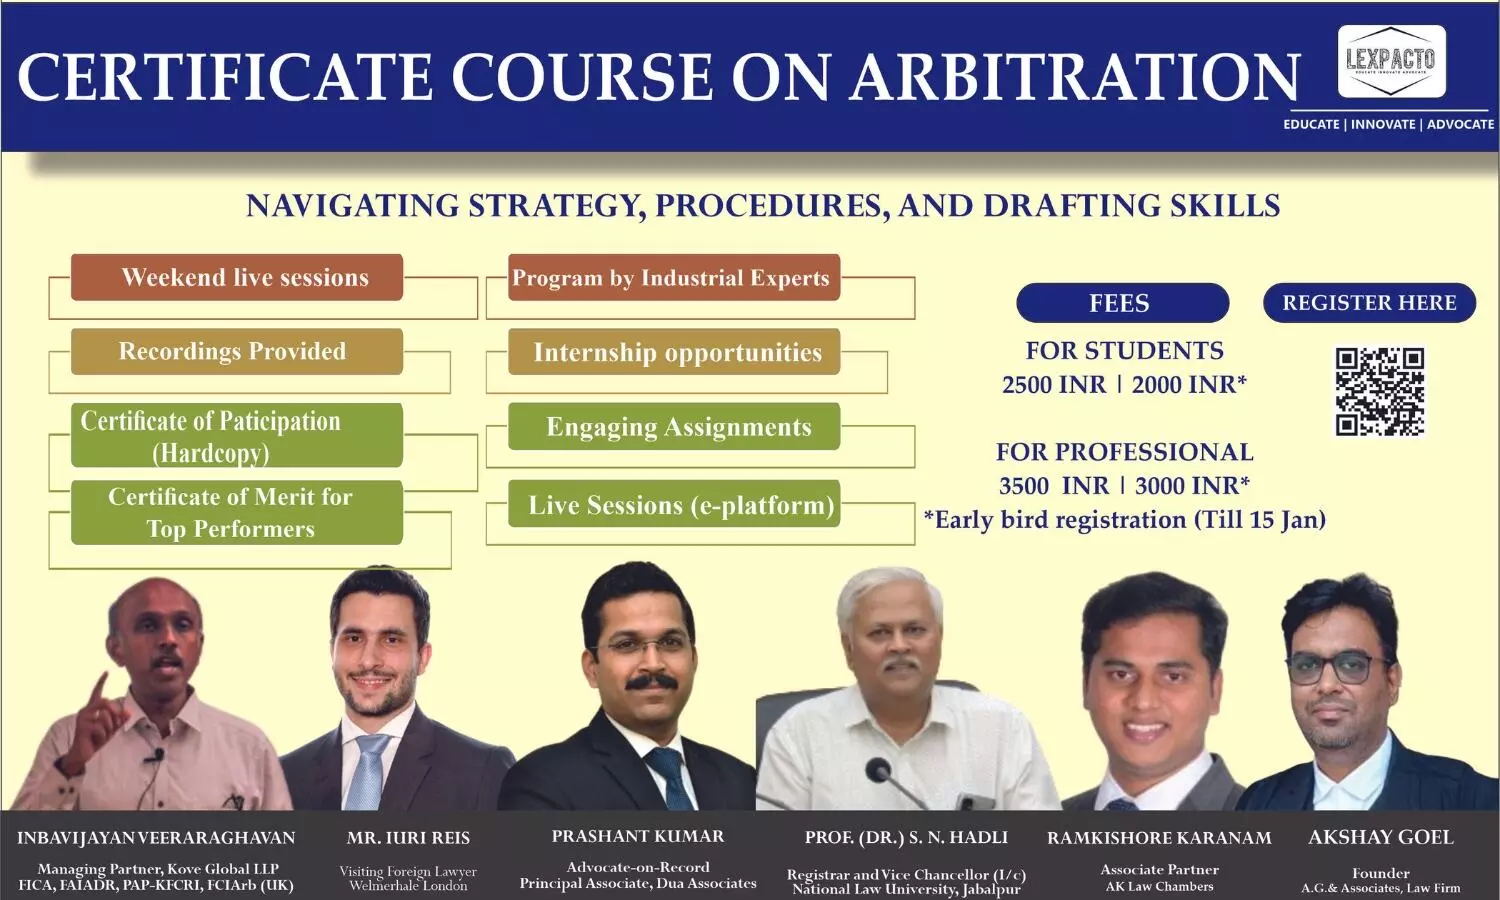 Certificate Course on Arbitration Navigating Strategy, Procedures, and Drafting Skills | LexPacto